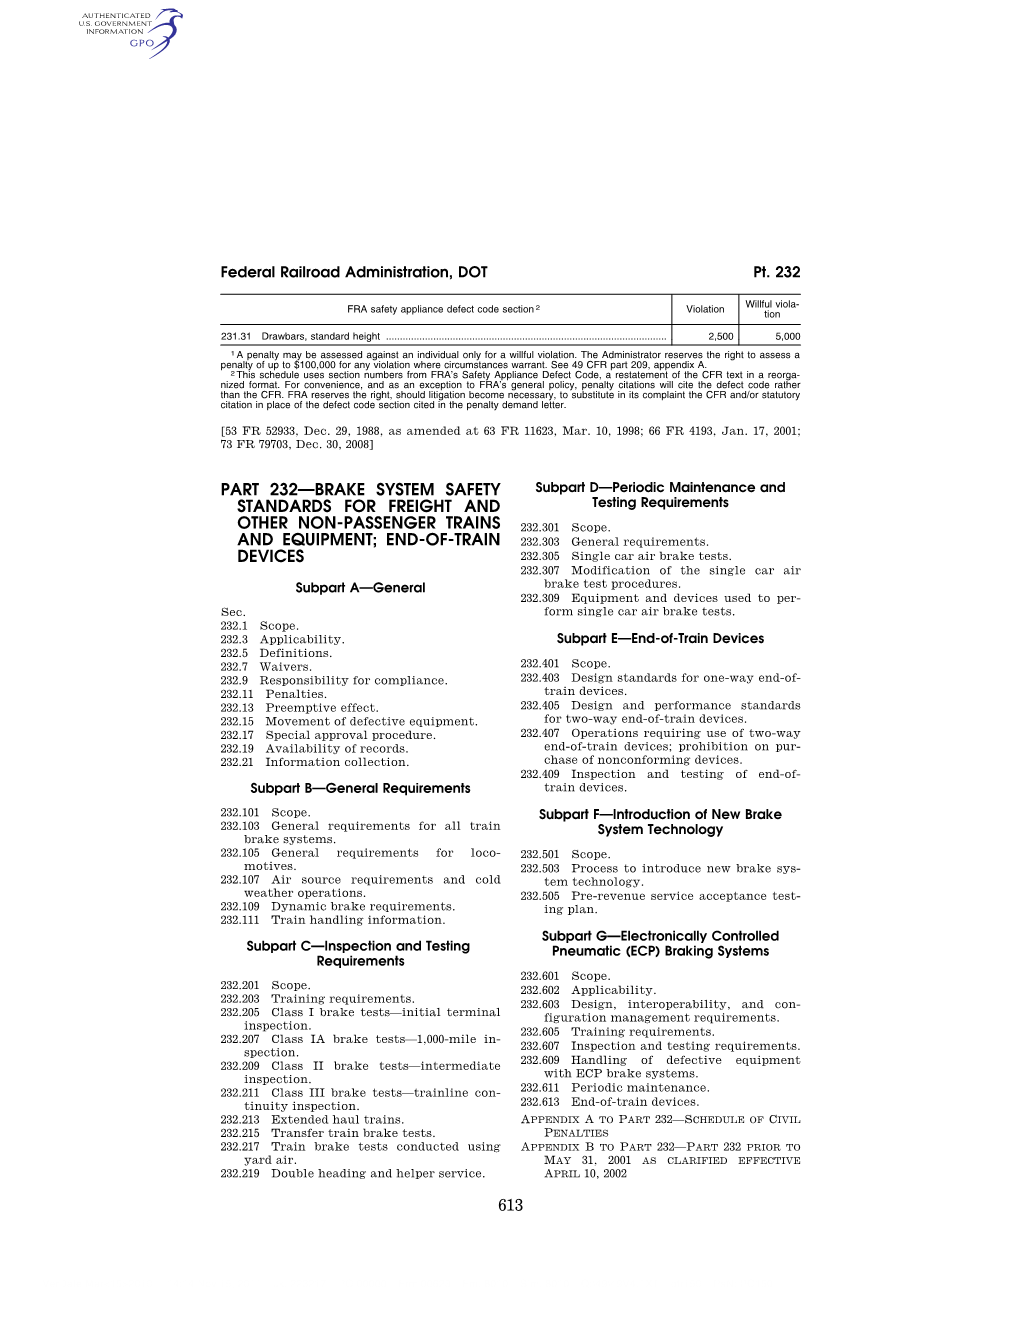 613 Part 232—Brake System Safety Standards for Freight and Other Non-Passenger Trains and Equipment